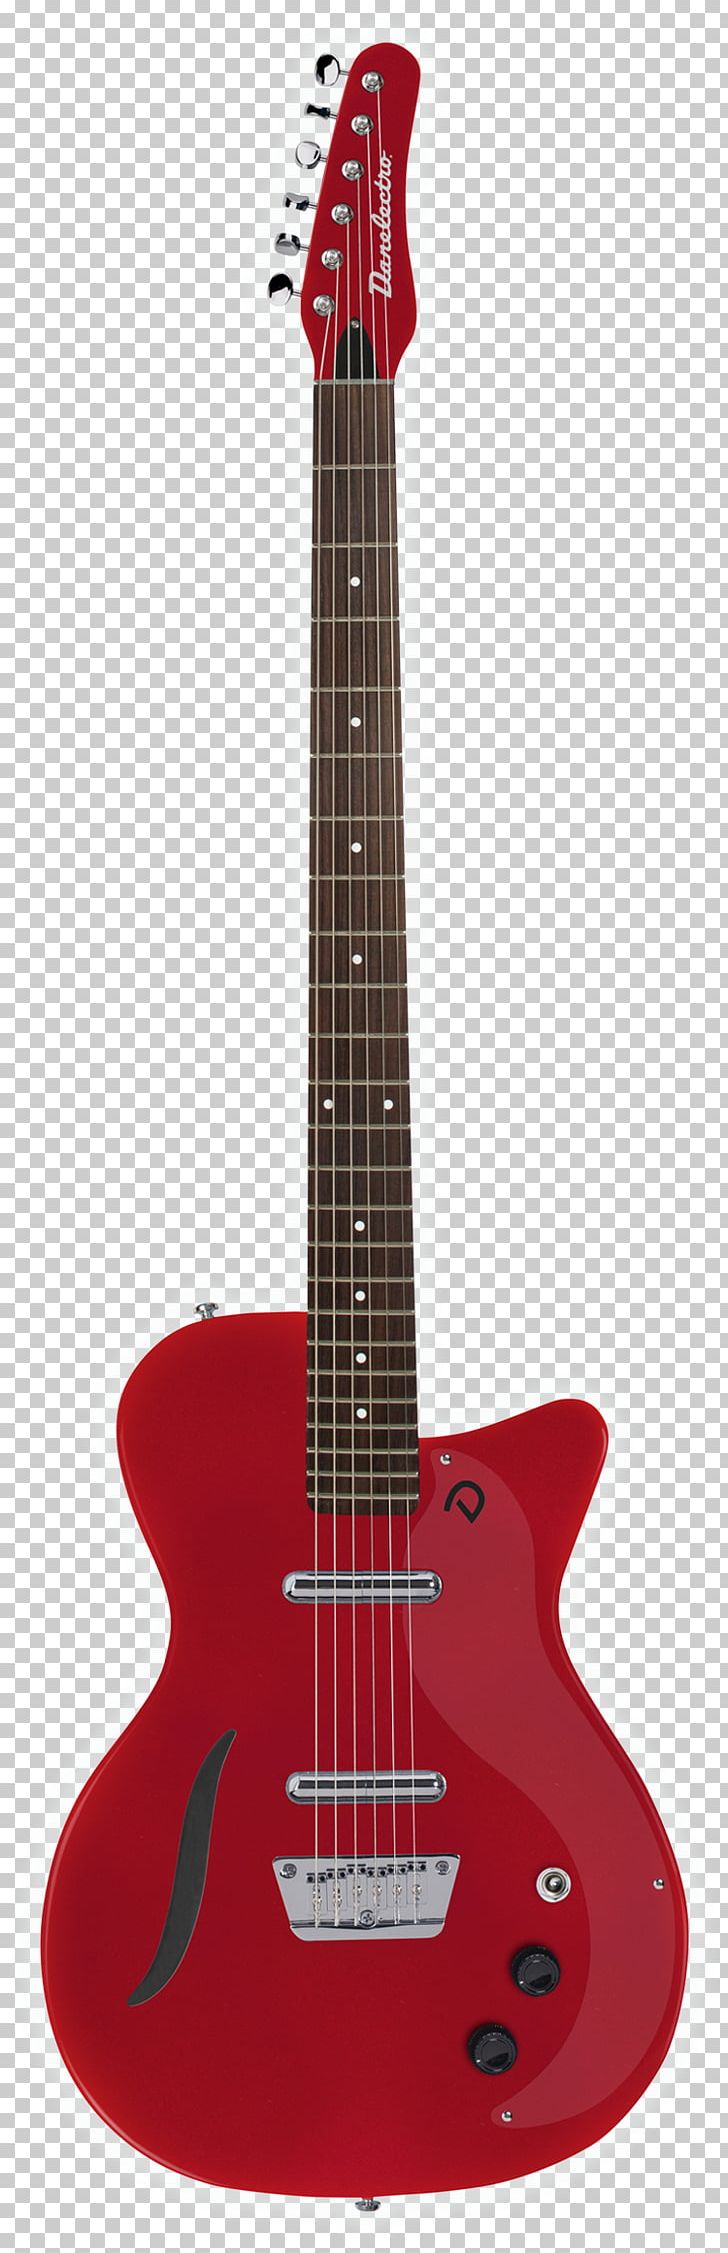 Guitar Amplifier Fender Stratocaster Electric Guitar Baritone Guitar PNG, Clipart, Acoustic Guitar, Archtop Guitar, Guitar Accessory, Large, Musical Instrument Free PNG Download